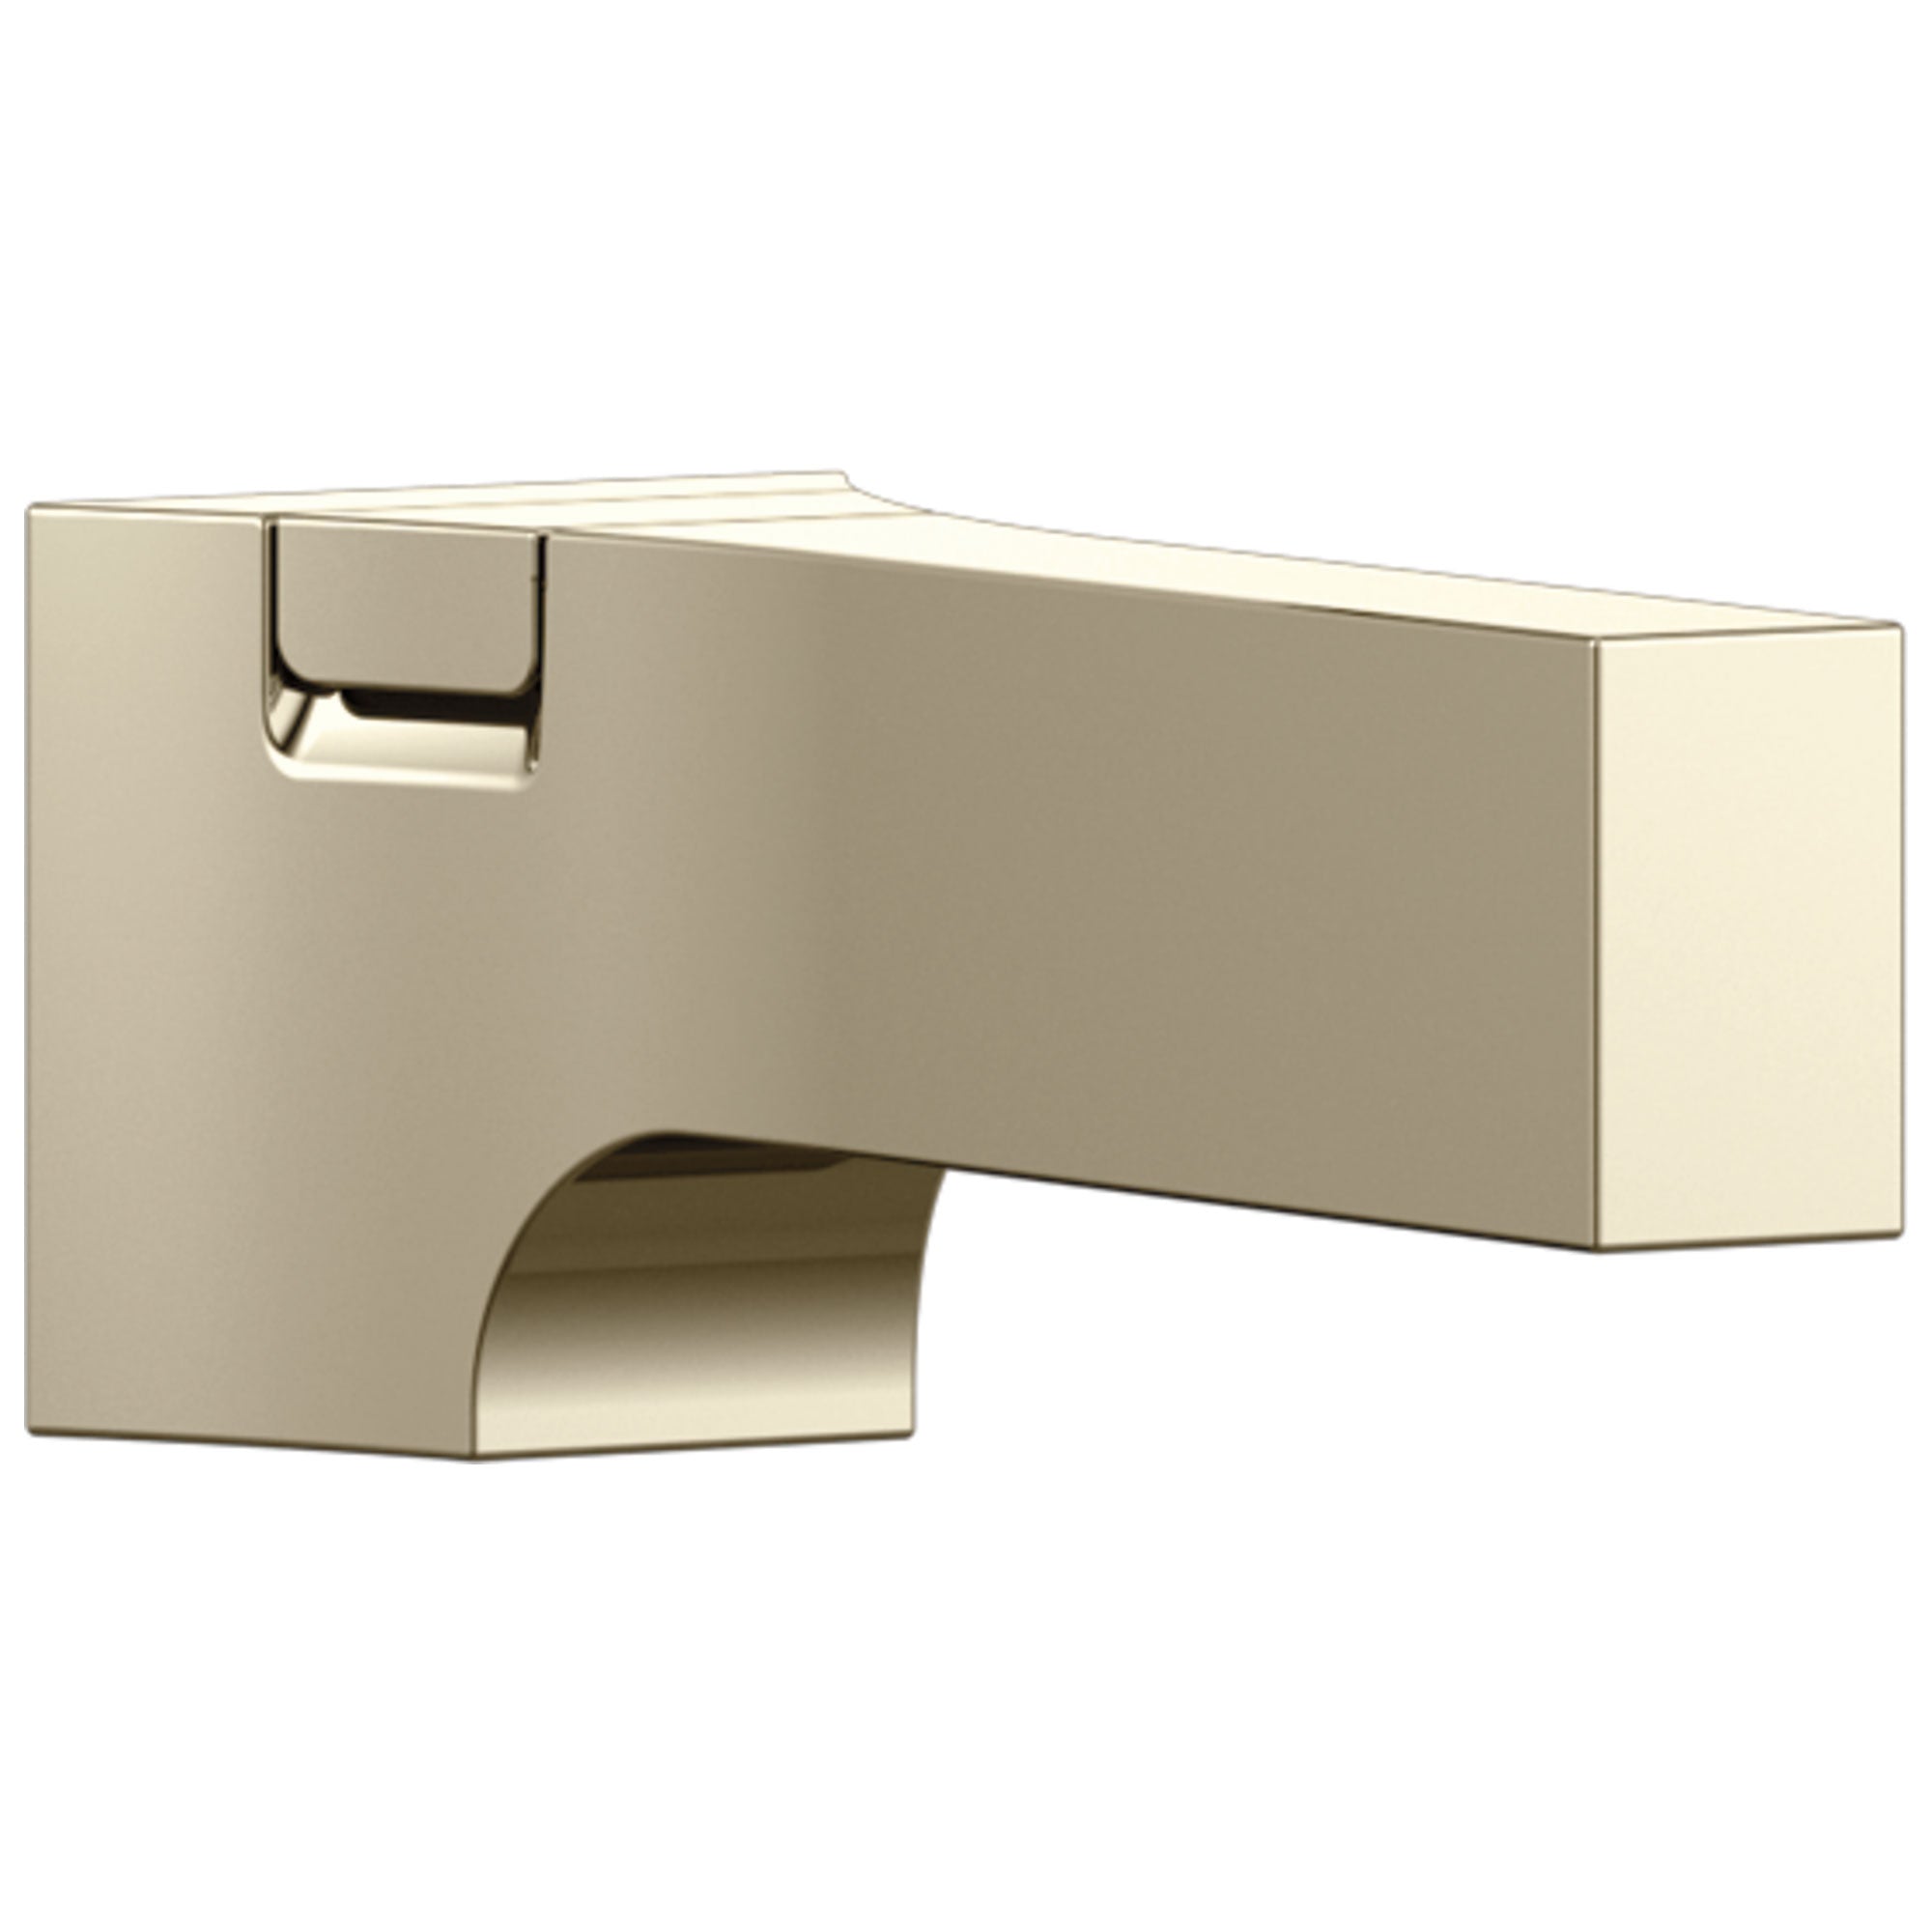 Delta Zura Collection Polished Nickel Finish Modern Tub Spout with Pull Up Diverter DRP84412PN